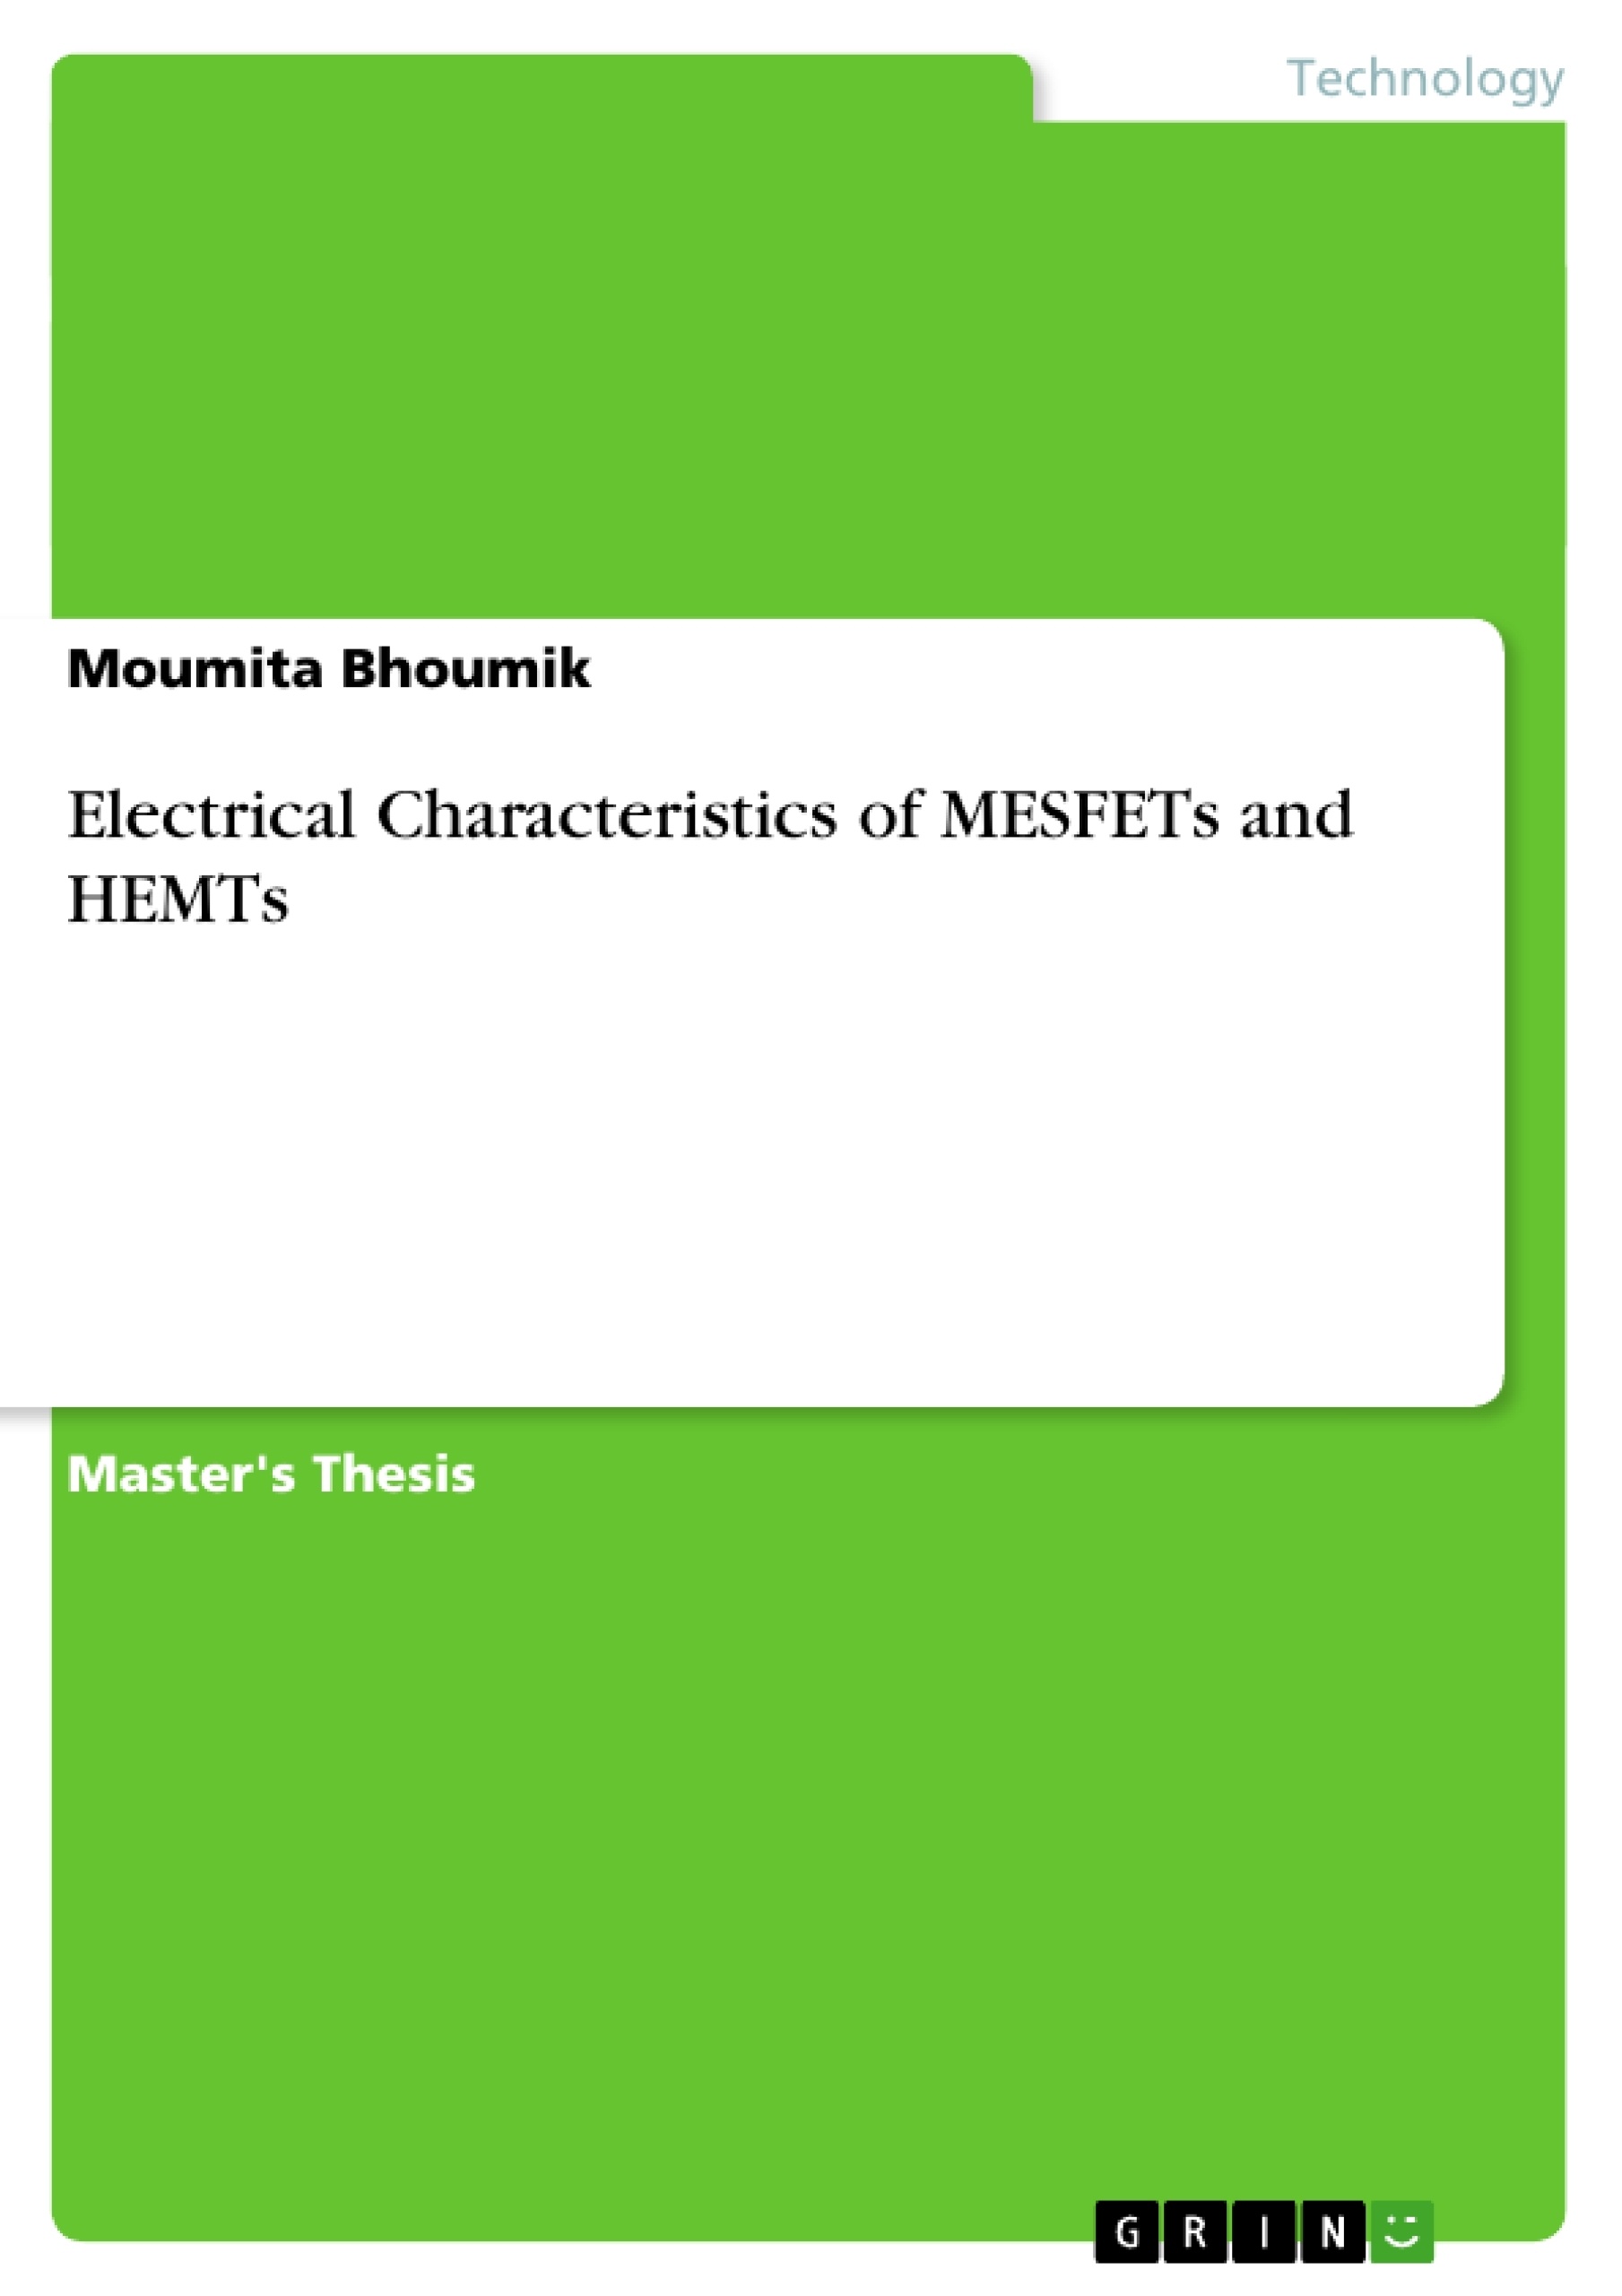 Title: Electrical Characteristics of MESFETs and HEMTs